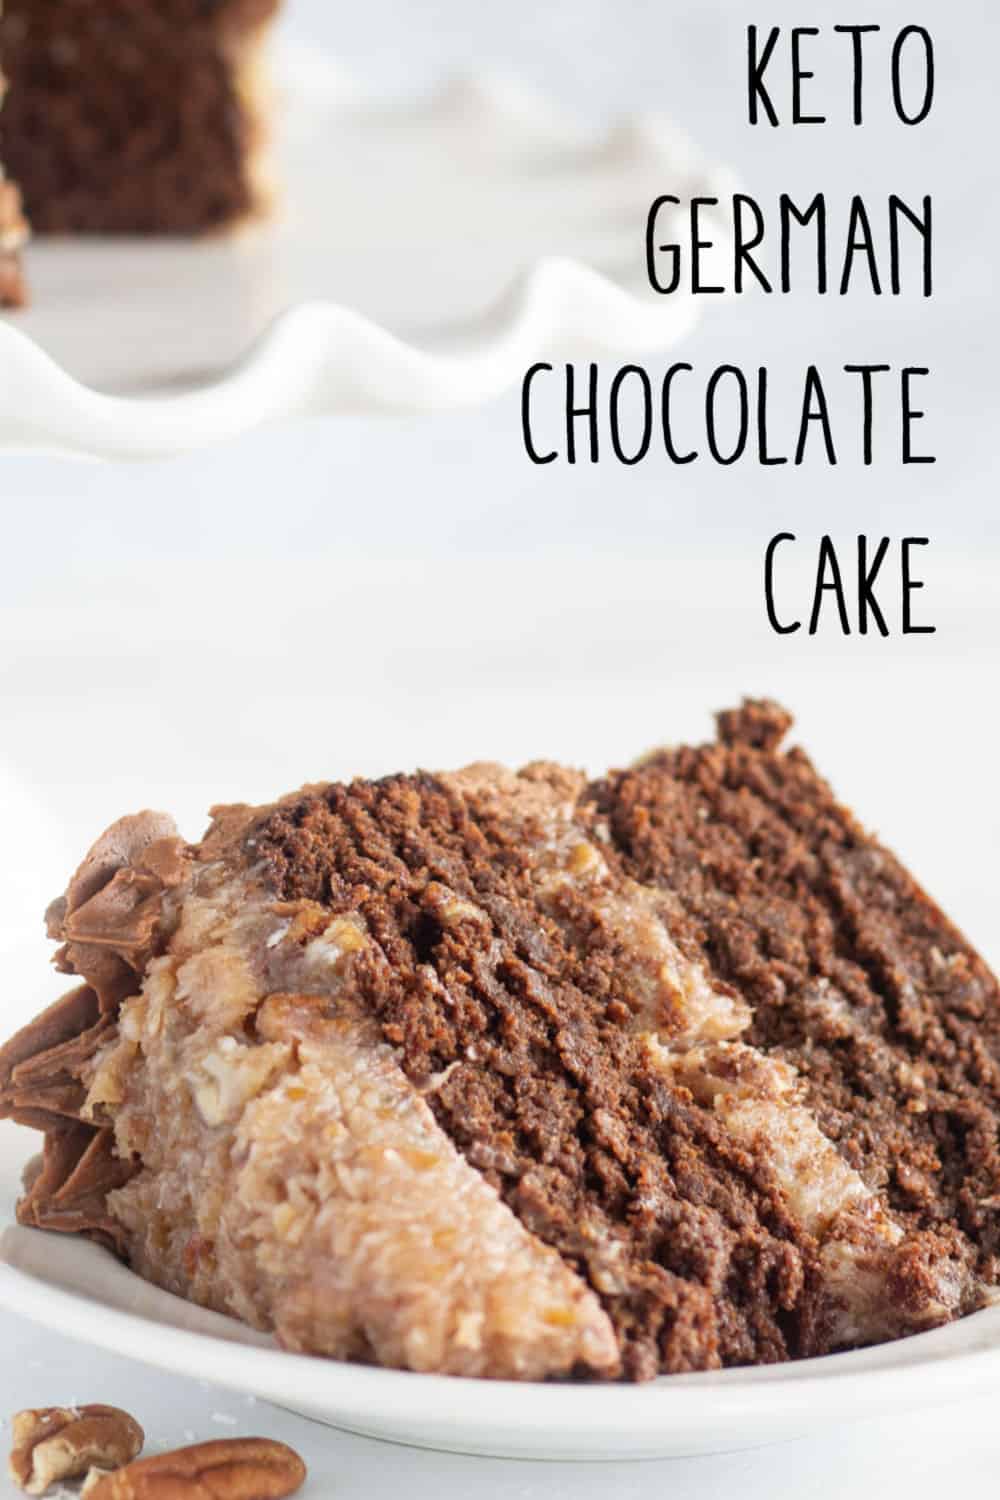 Keto German Chocolate Cake With Coconut Pecan Frosting